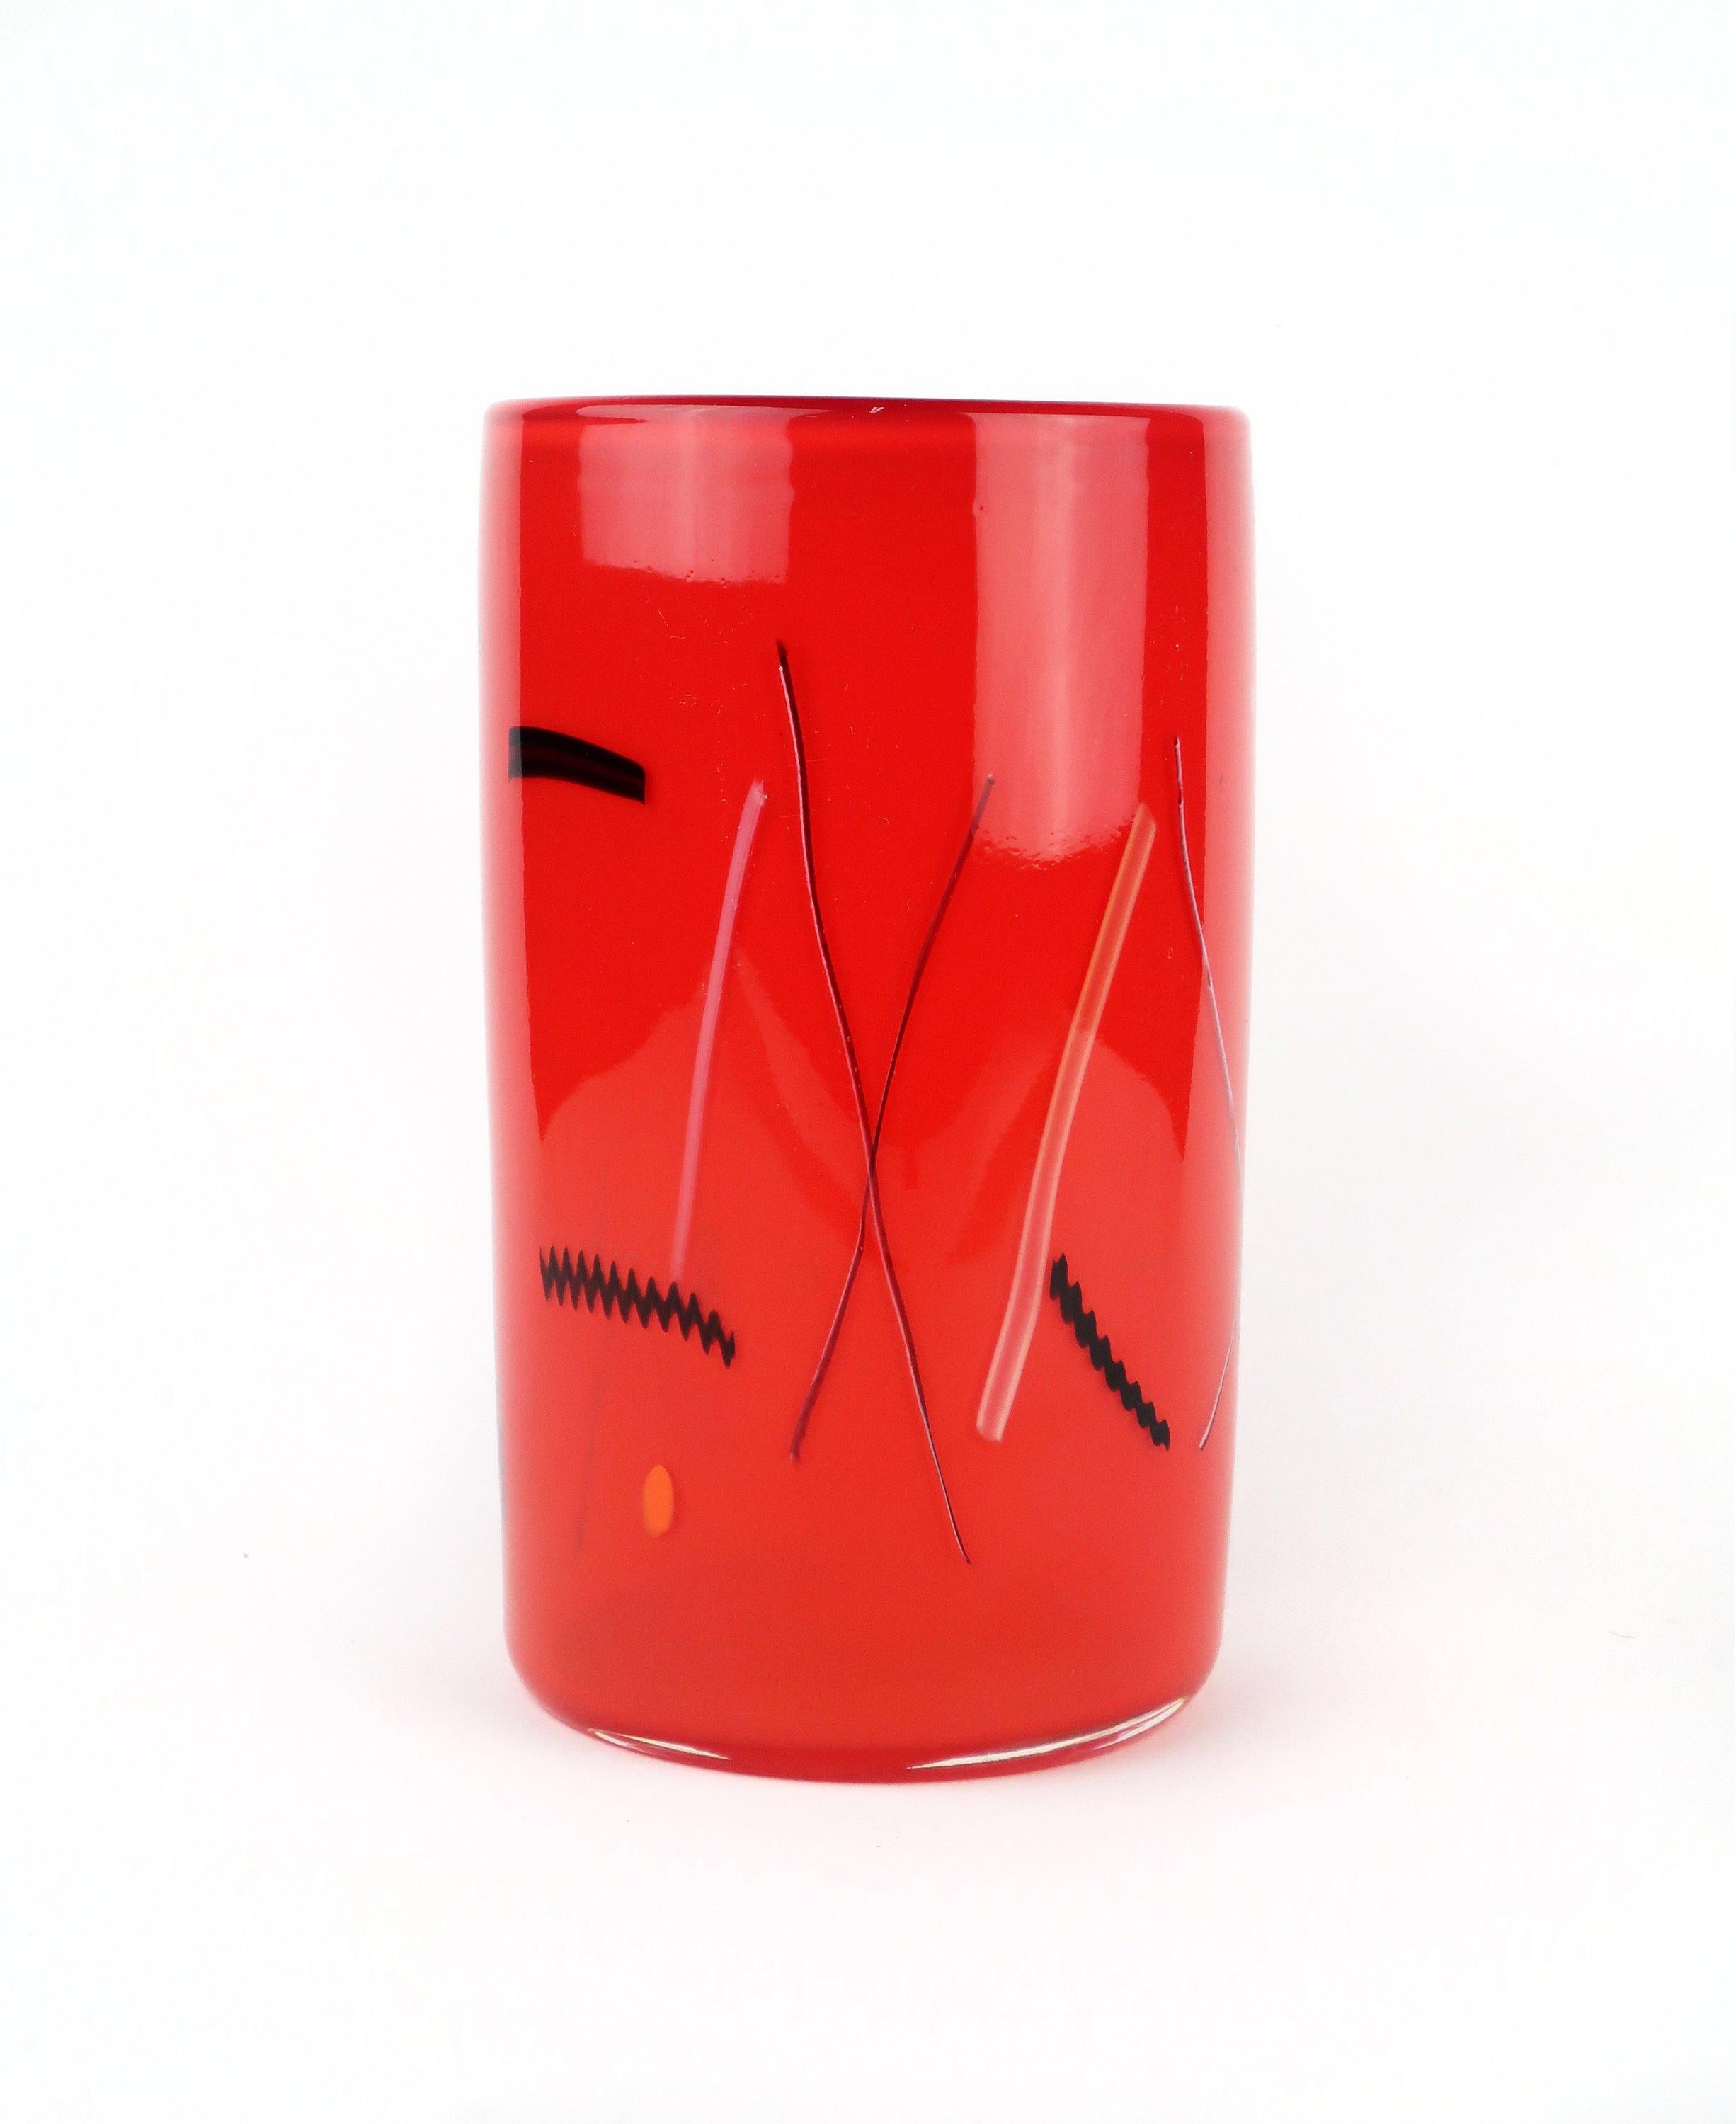 Bright and beautiful red cylindrical art glass vase by husband and wife team, Bruce Pizzichillo and Dari Gordon, with black, white, yellow and orange fused accents. The Pizzichillo Gordon studio has been producing work since 1984 and can be found in